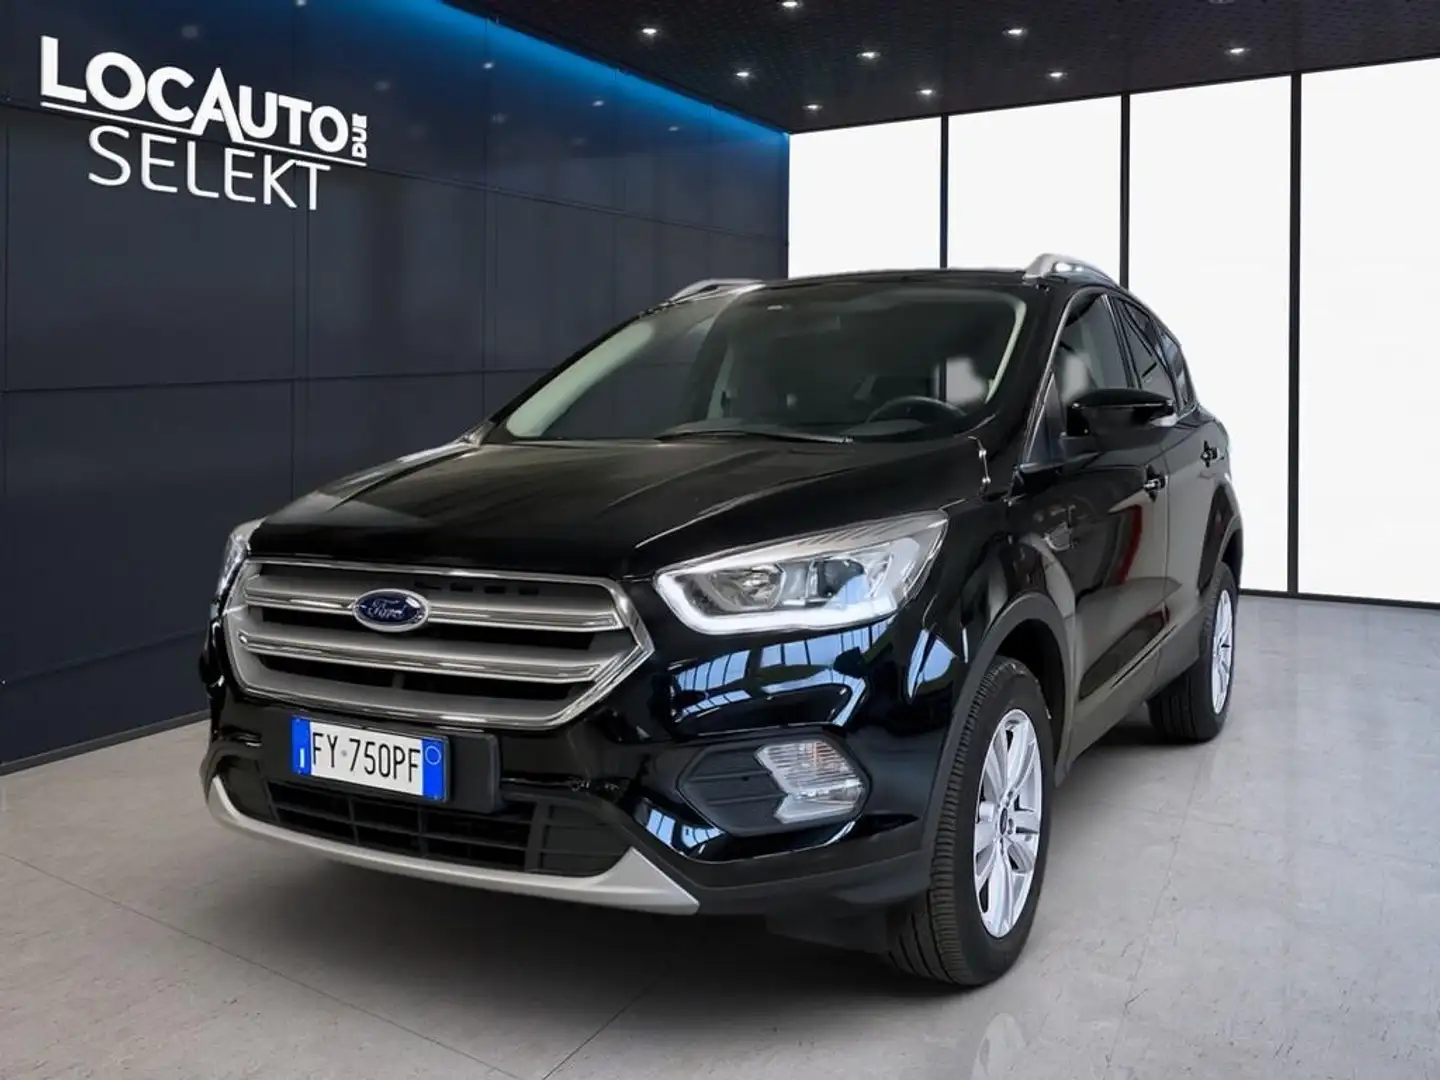 Ford Kuga 1.5 tdci Business s&s 2wd 120cv my18 - PROMO Black - 1